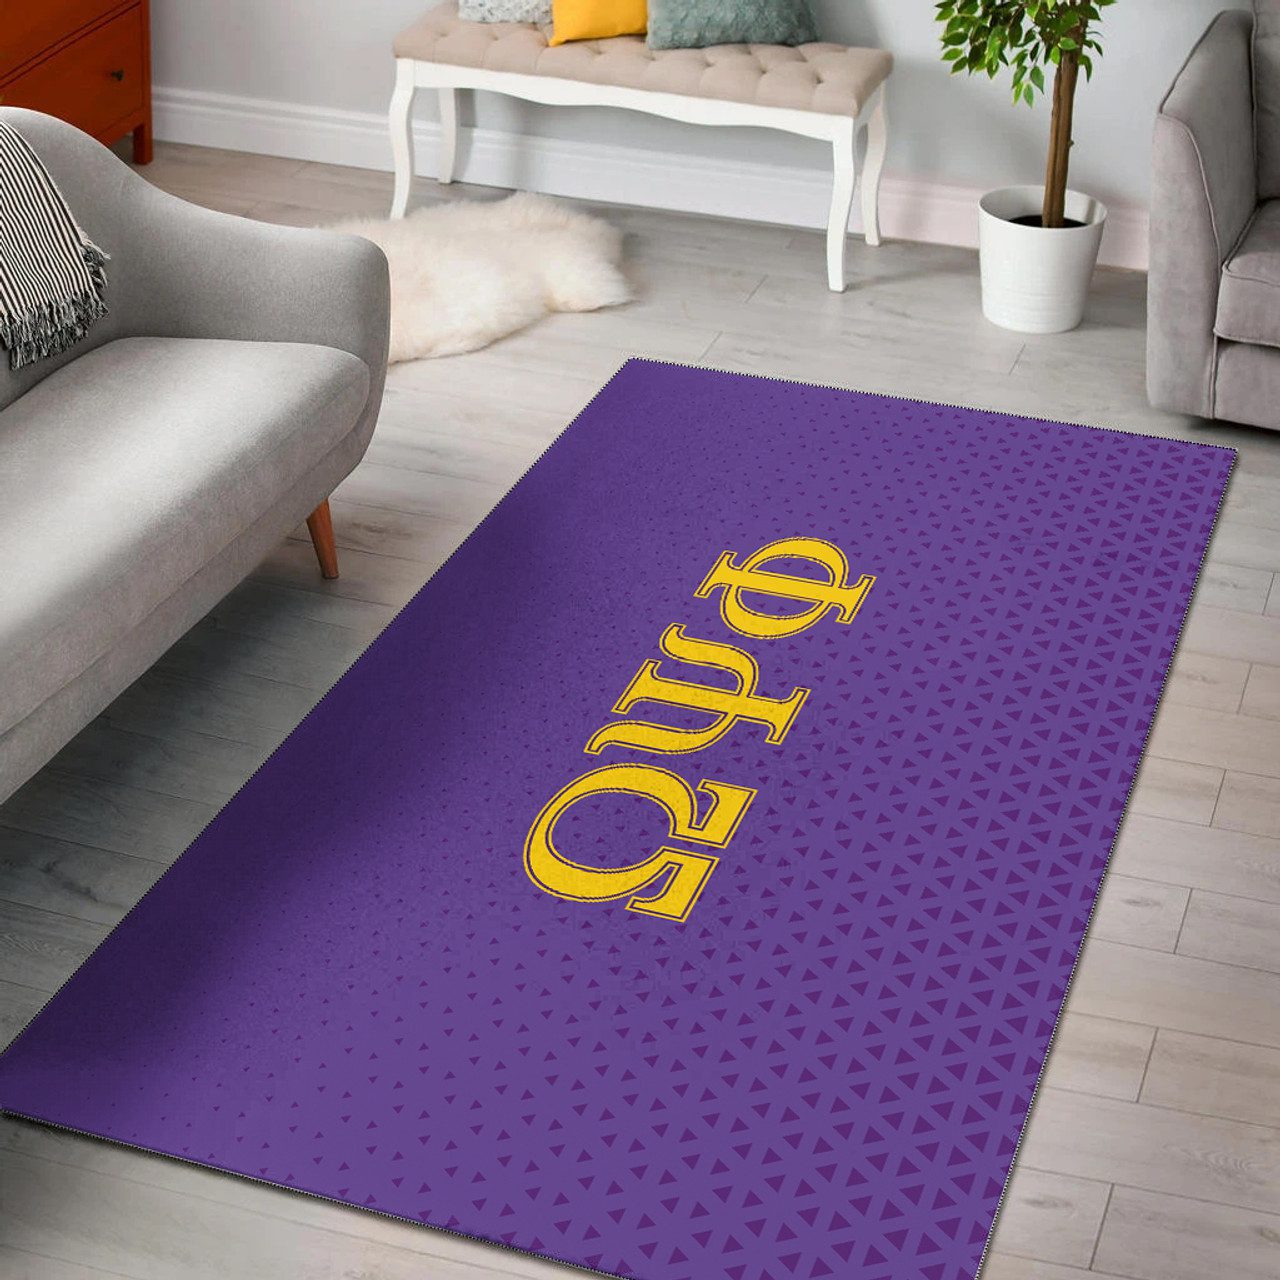 Omega Psi Phi Area Rug Classic Greek Letters Offical